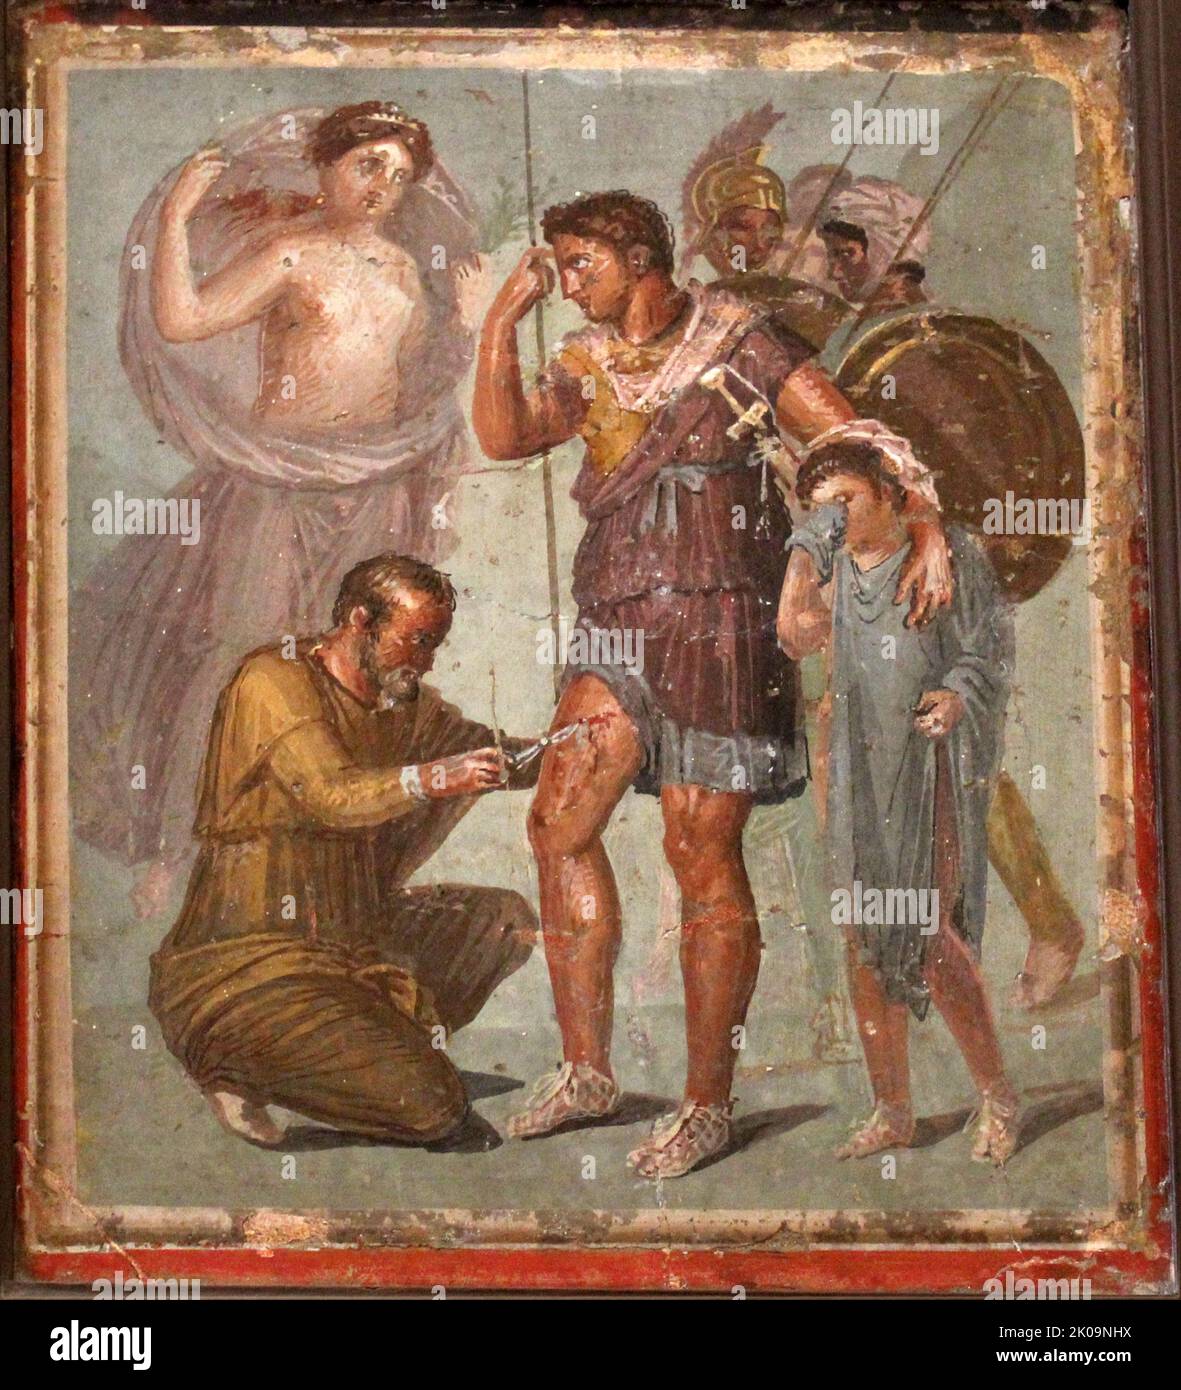 Roman Fresco depicting Aeneas wounded as he gazes at his mother Aphrodite, his son Ascanius is crying; a doctor treats his wounds, by an unknown artist, 45-79, 1st Century A.D. Stock Photo